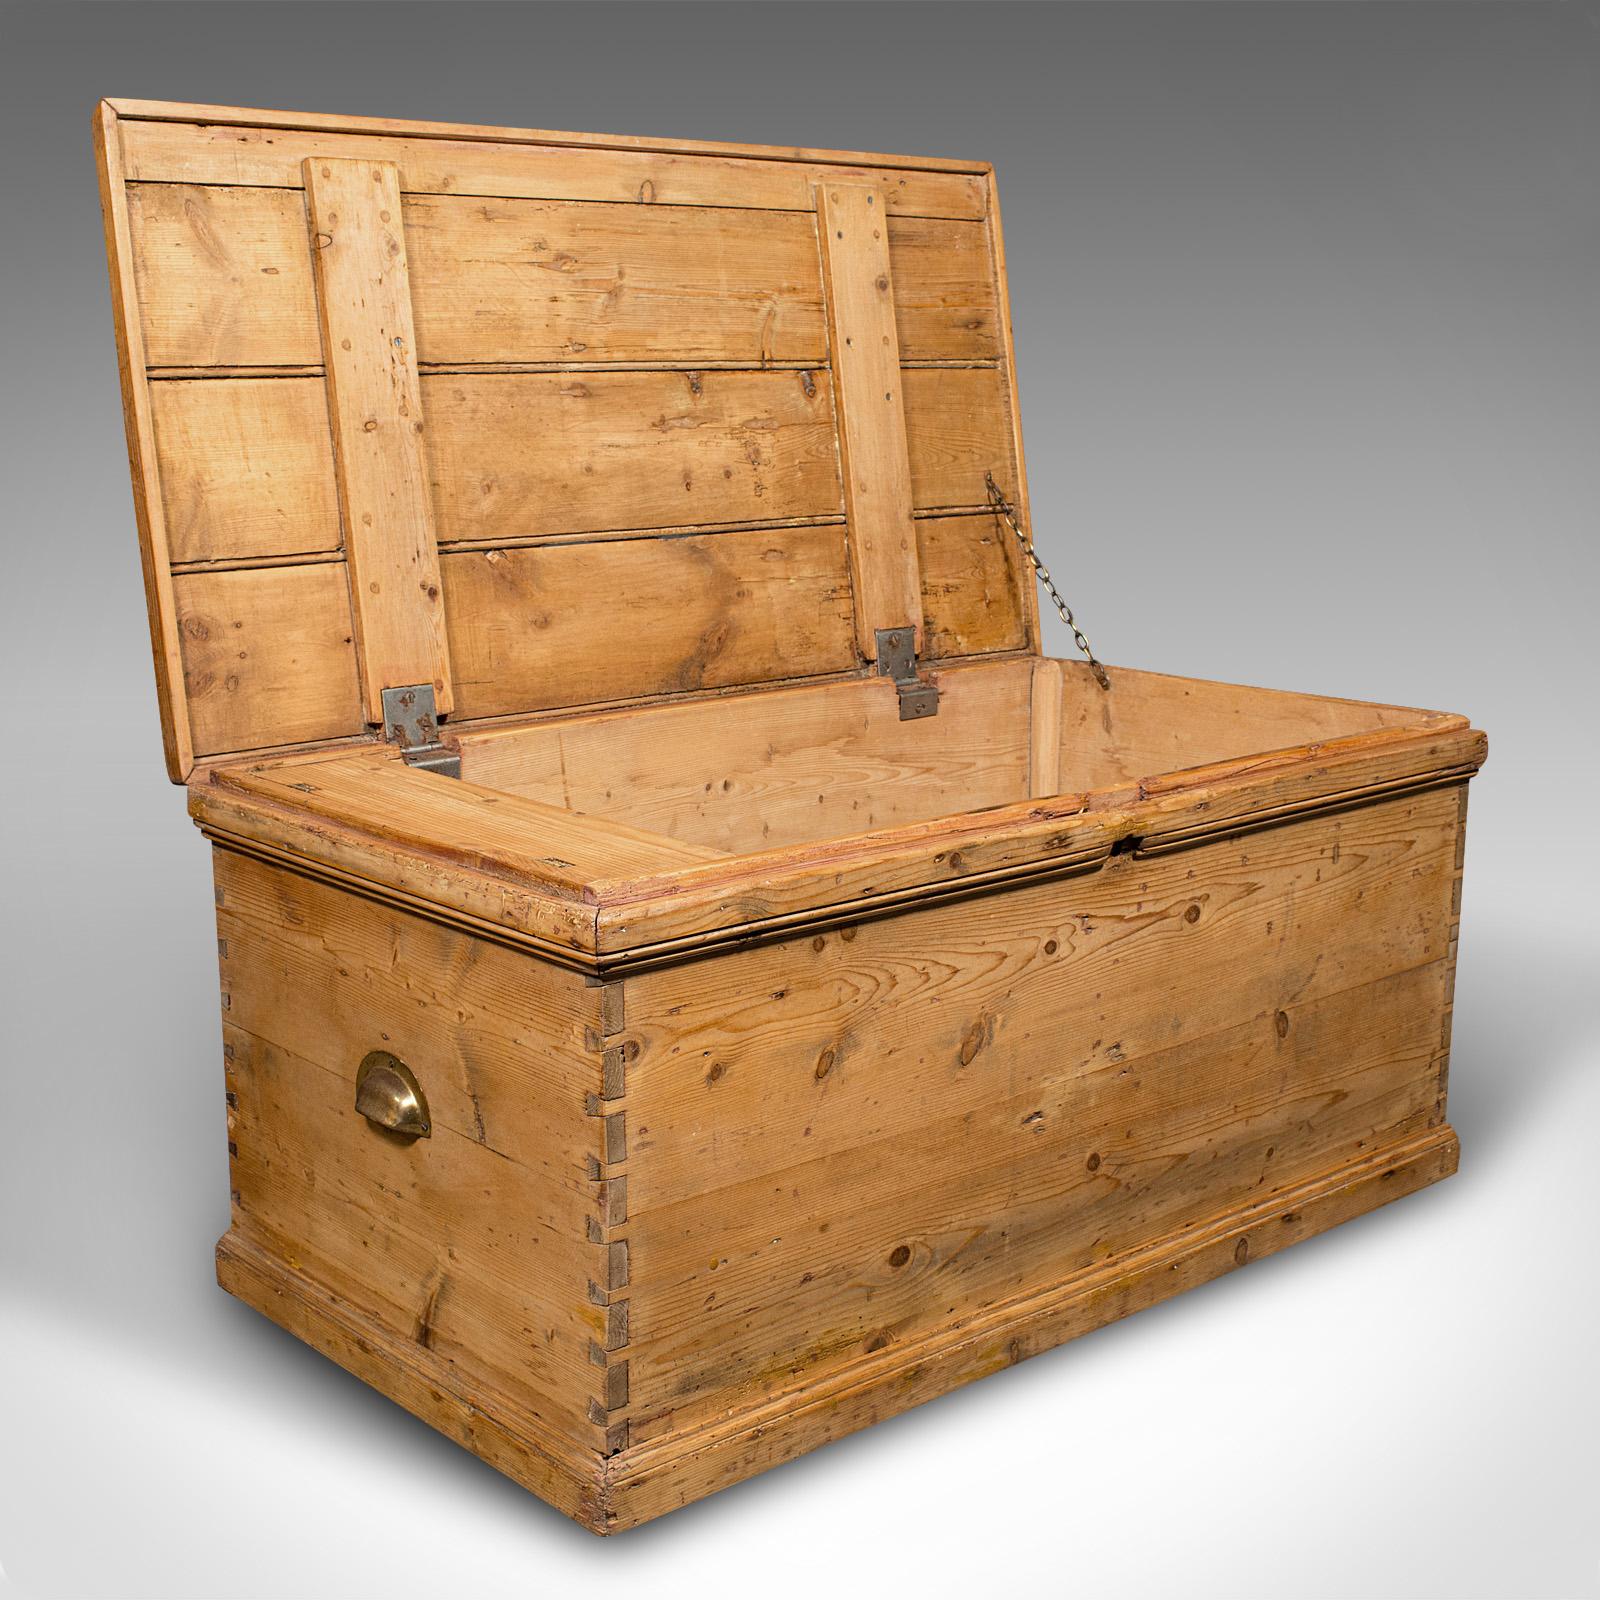 
This is an antique work chest. An English, pine tool trunk with candle box, dating to the late Victorian period, circa 1900.

Delightfully useful pine trunk with a superb fitted interior
Displays a desirable aged patina and in good order
Pine